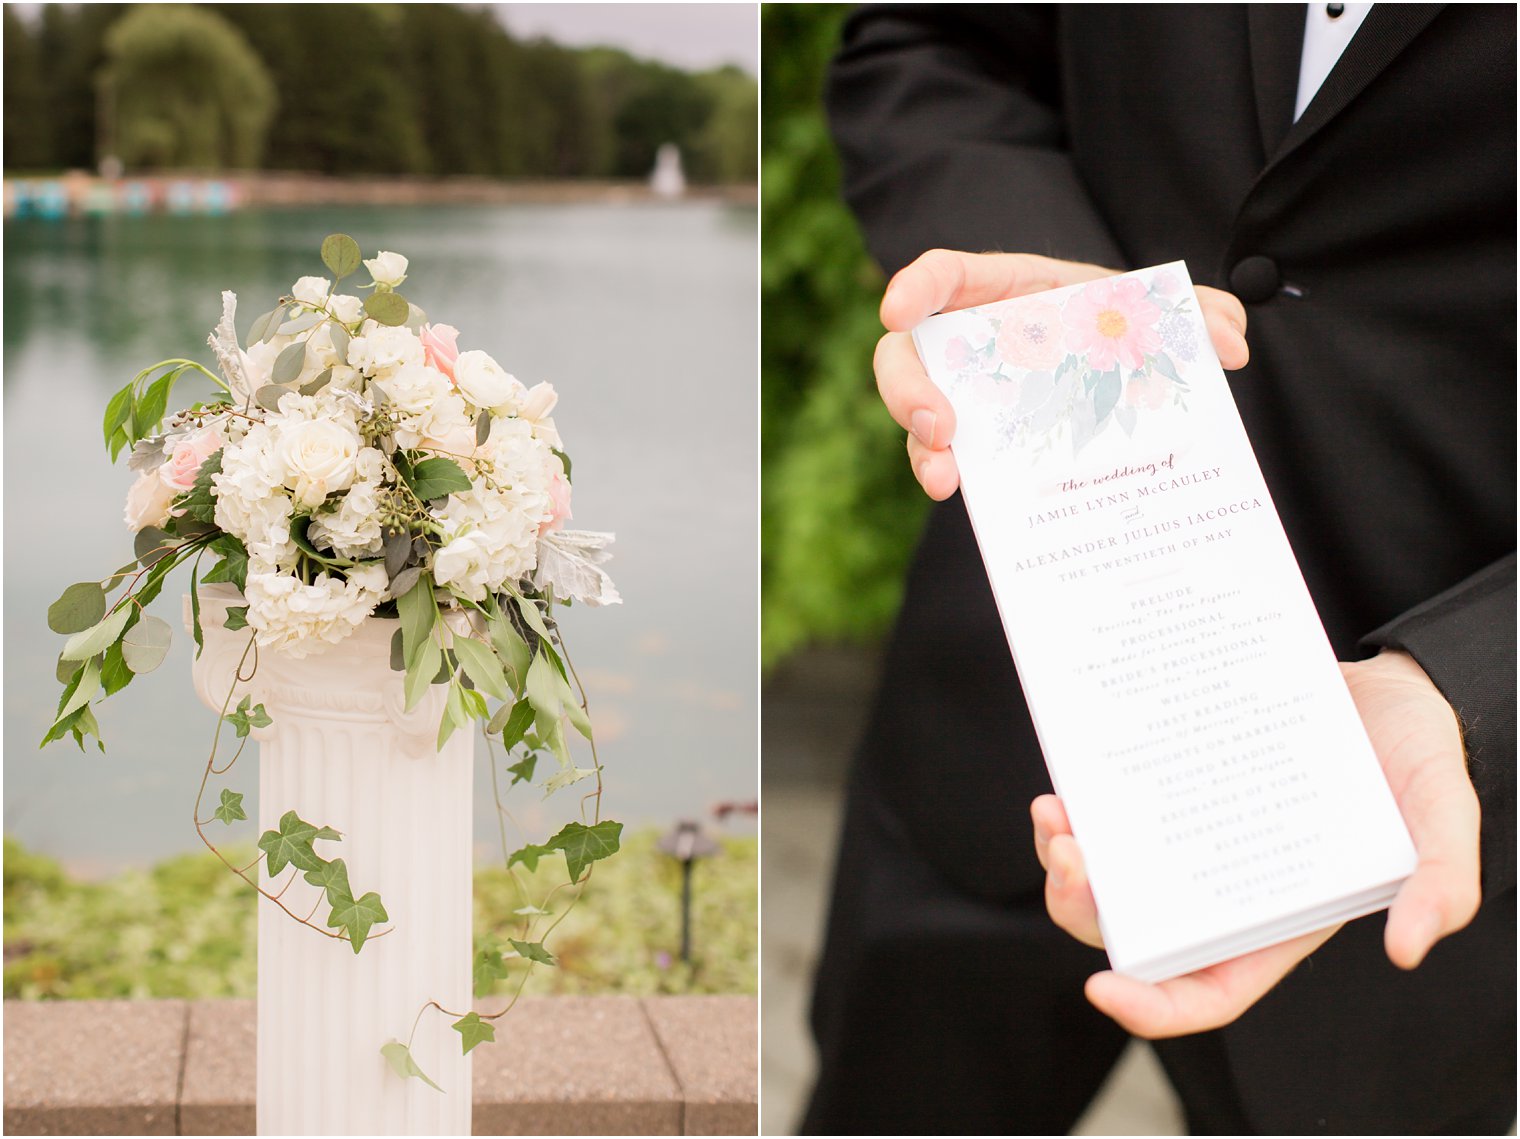 Outdoor ceremony at Windows on the Water at Frogbridge | Photos by Idalia Photography